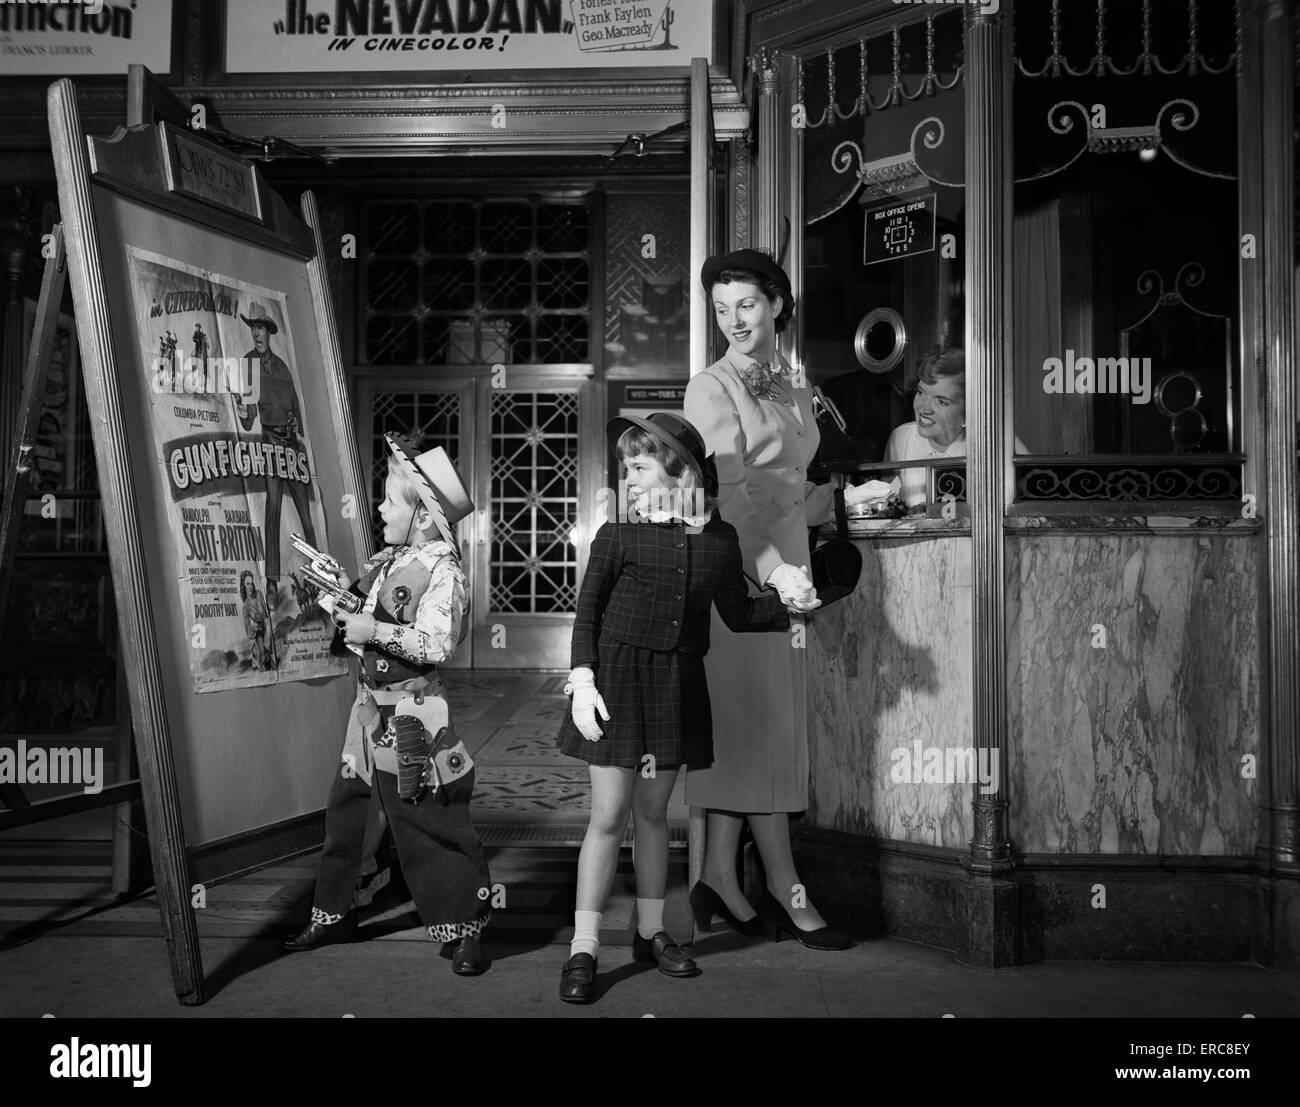 1950s MOTHER TAKING KIDS TO MOVIES BUYING TICKETS TO A WESTERN BOY WEARING COWBOY COSTUME Stock Photo